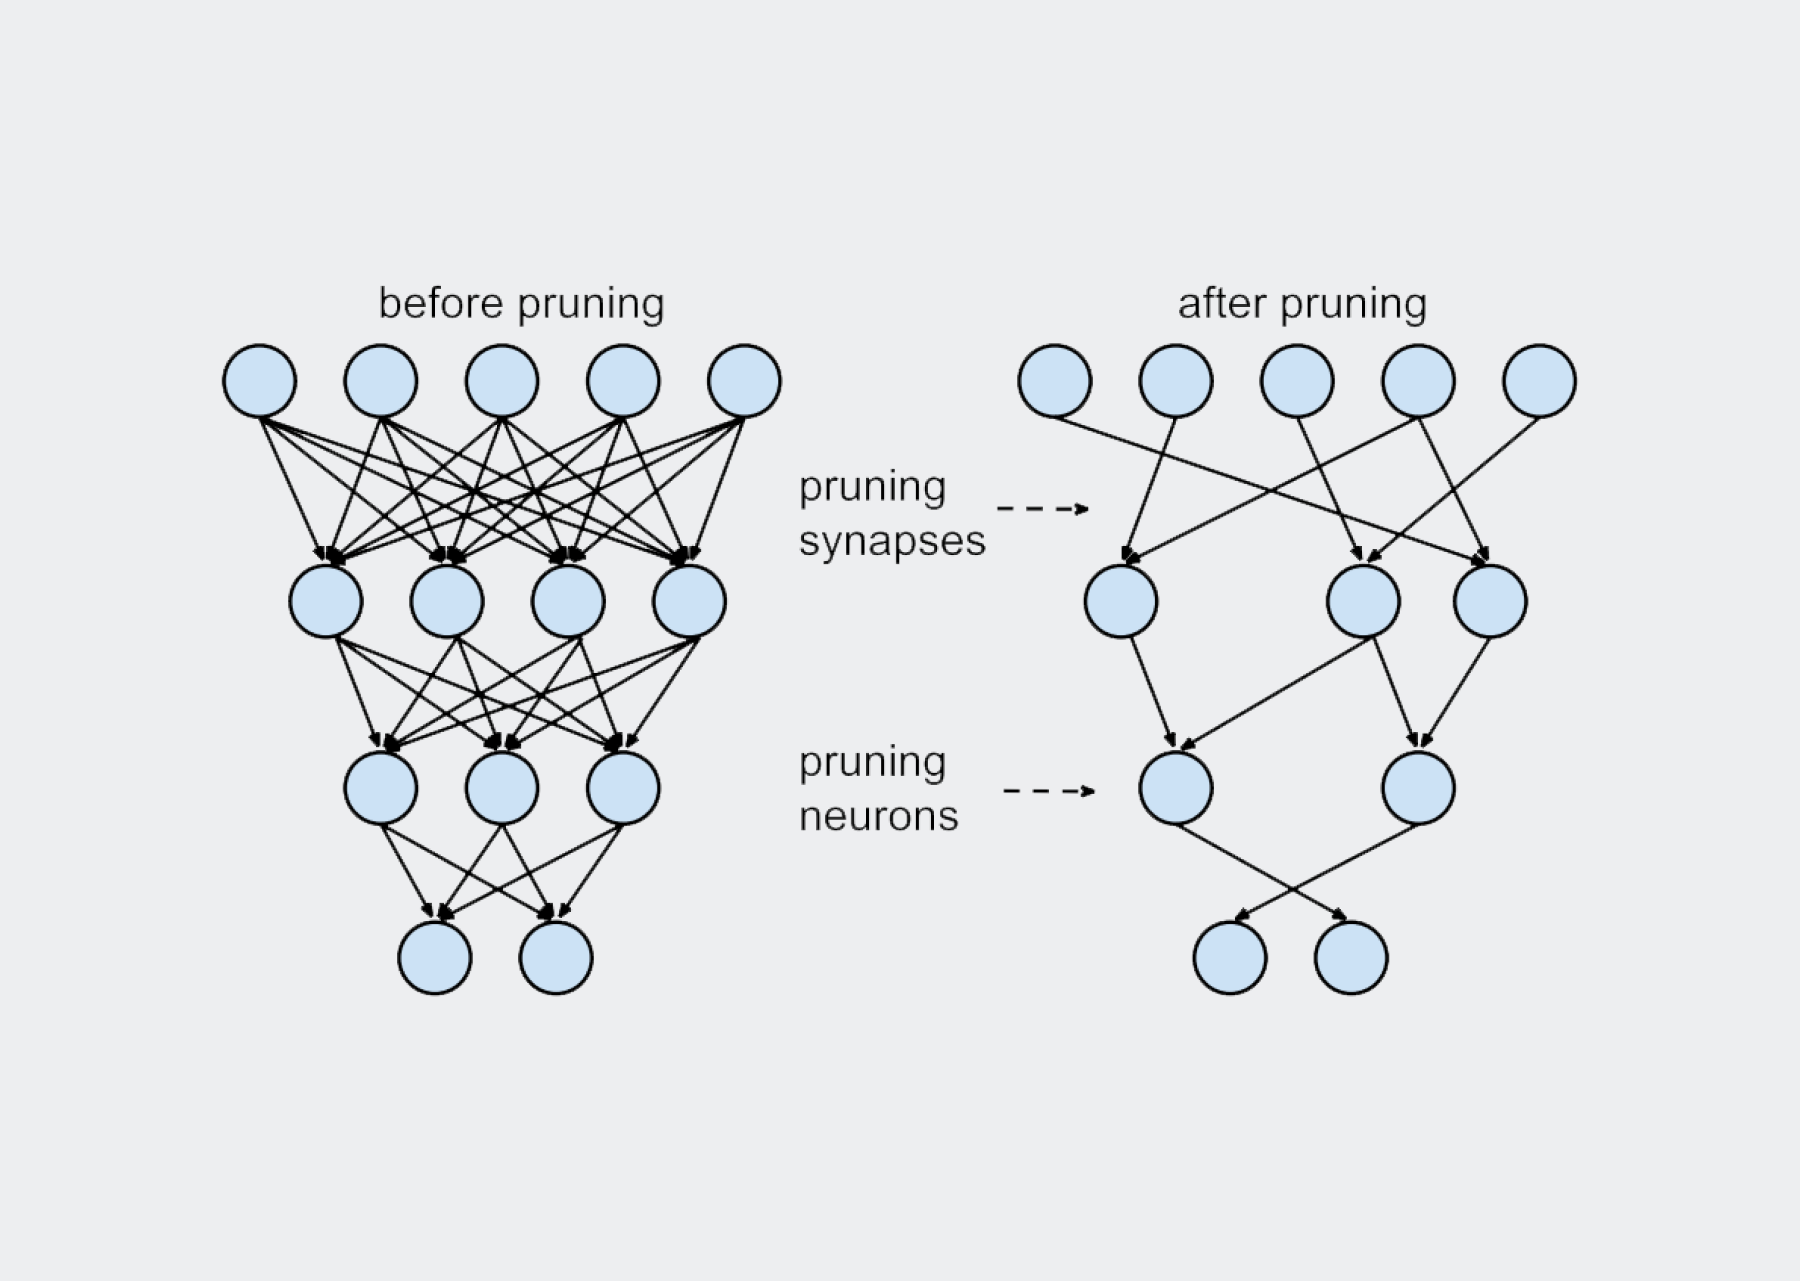 Paper Review: Rethinking the Value of Network Pruning (2)